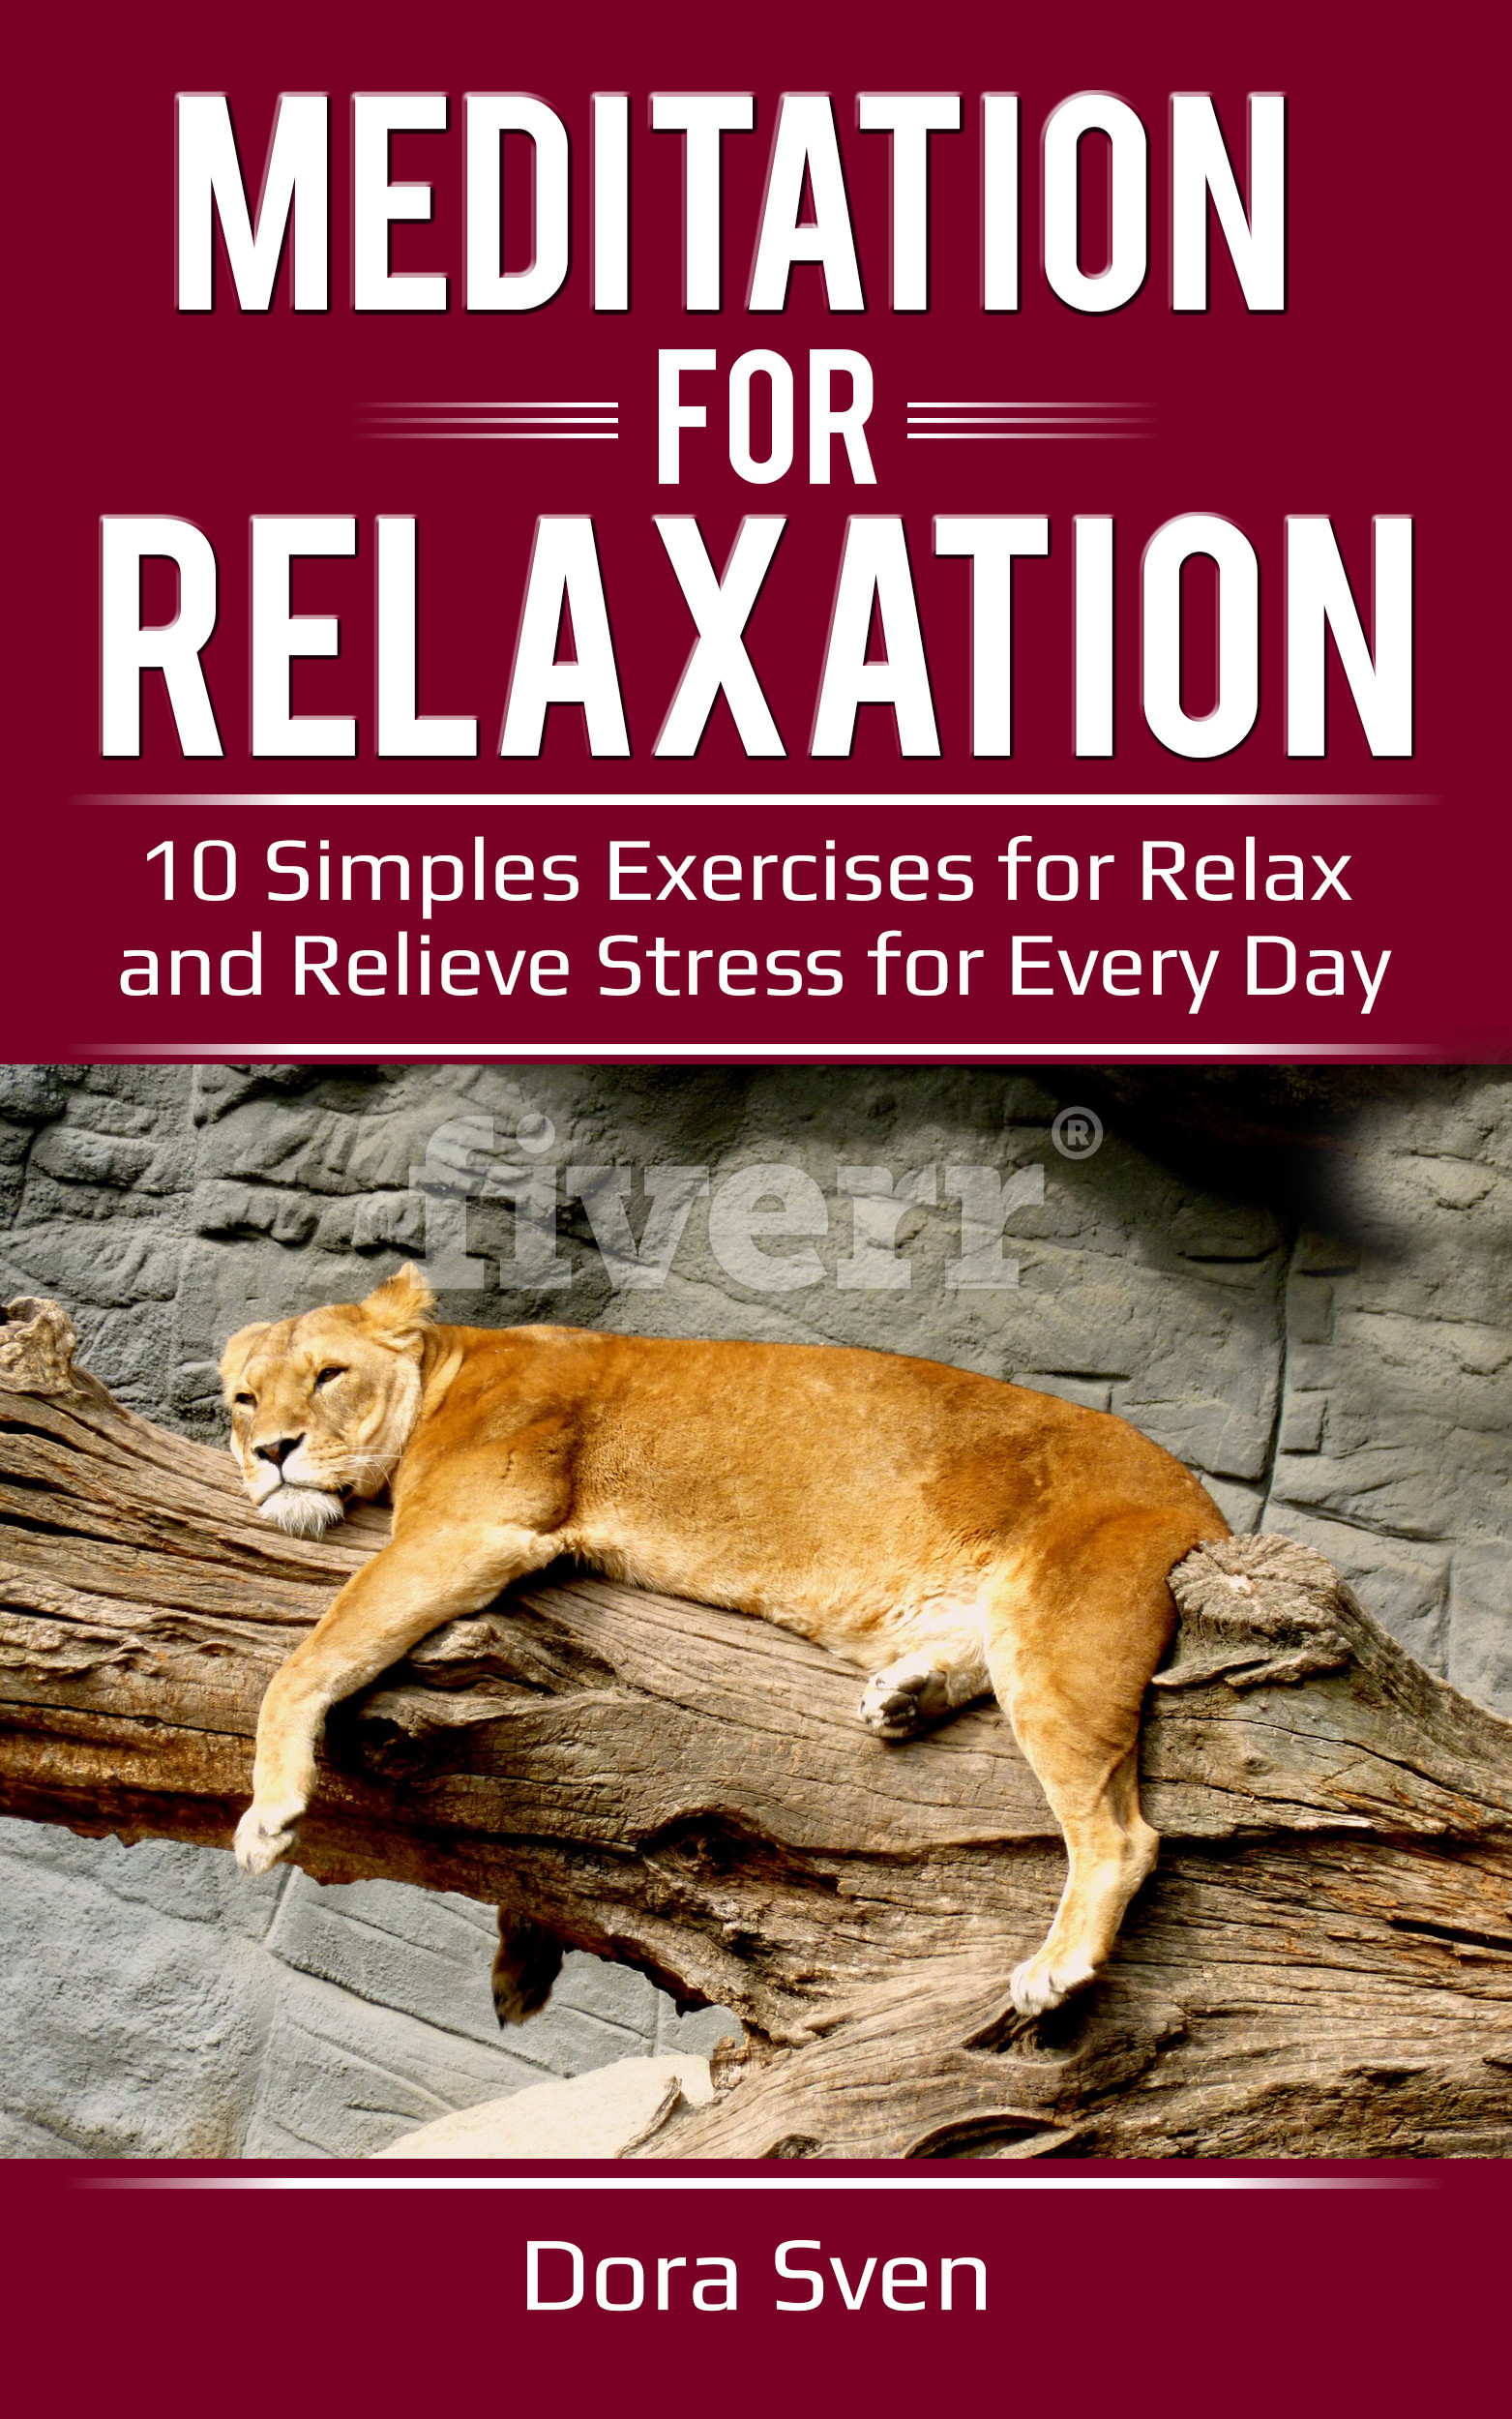 FREE: Meditation for Relaxation 10 Simple Exercises to Relax and Relieve Stress for Every Day by Dora Sven